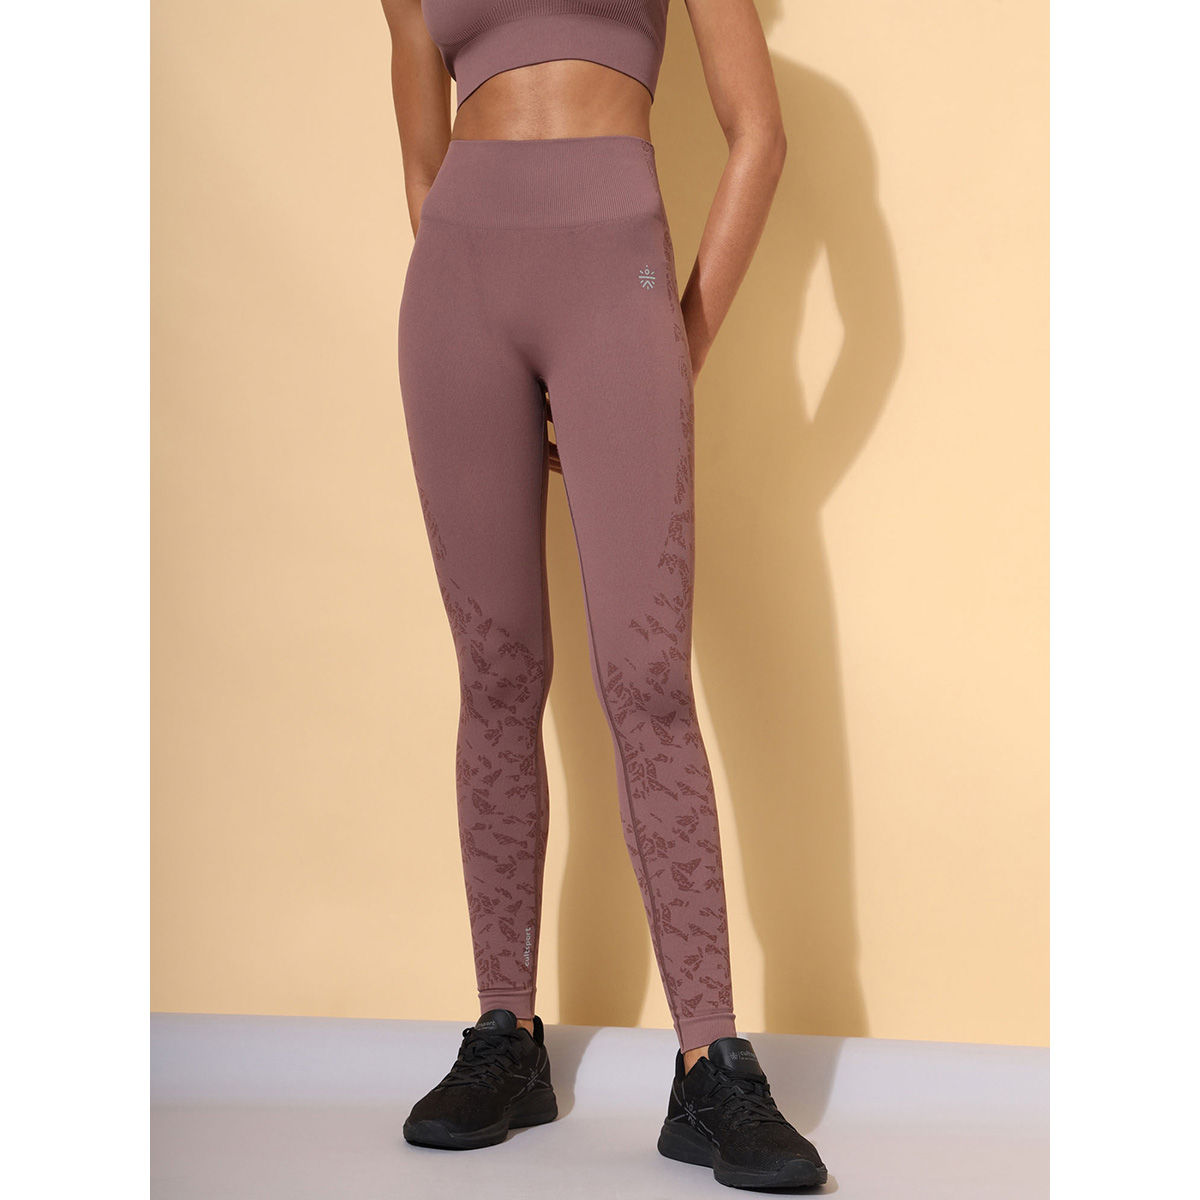 Buy Cultsport Seamless Jacquard Tights Online